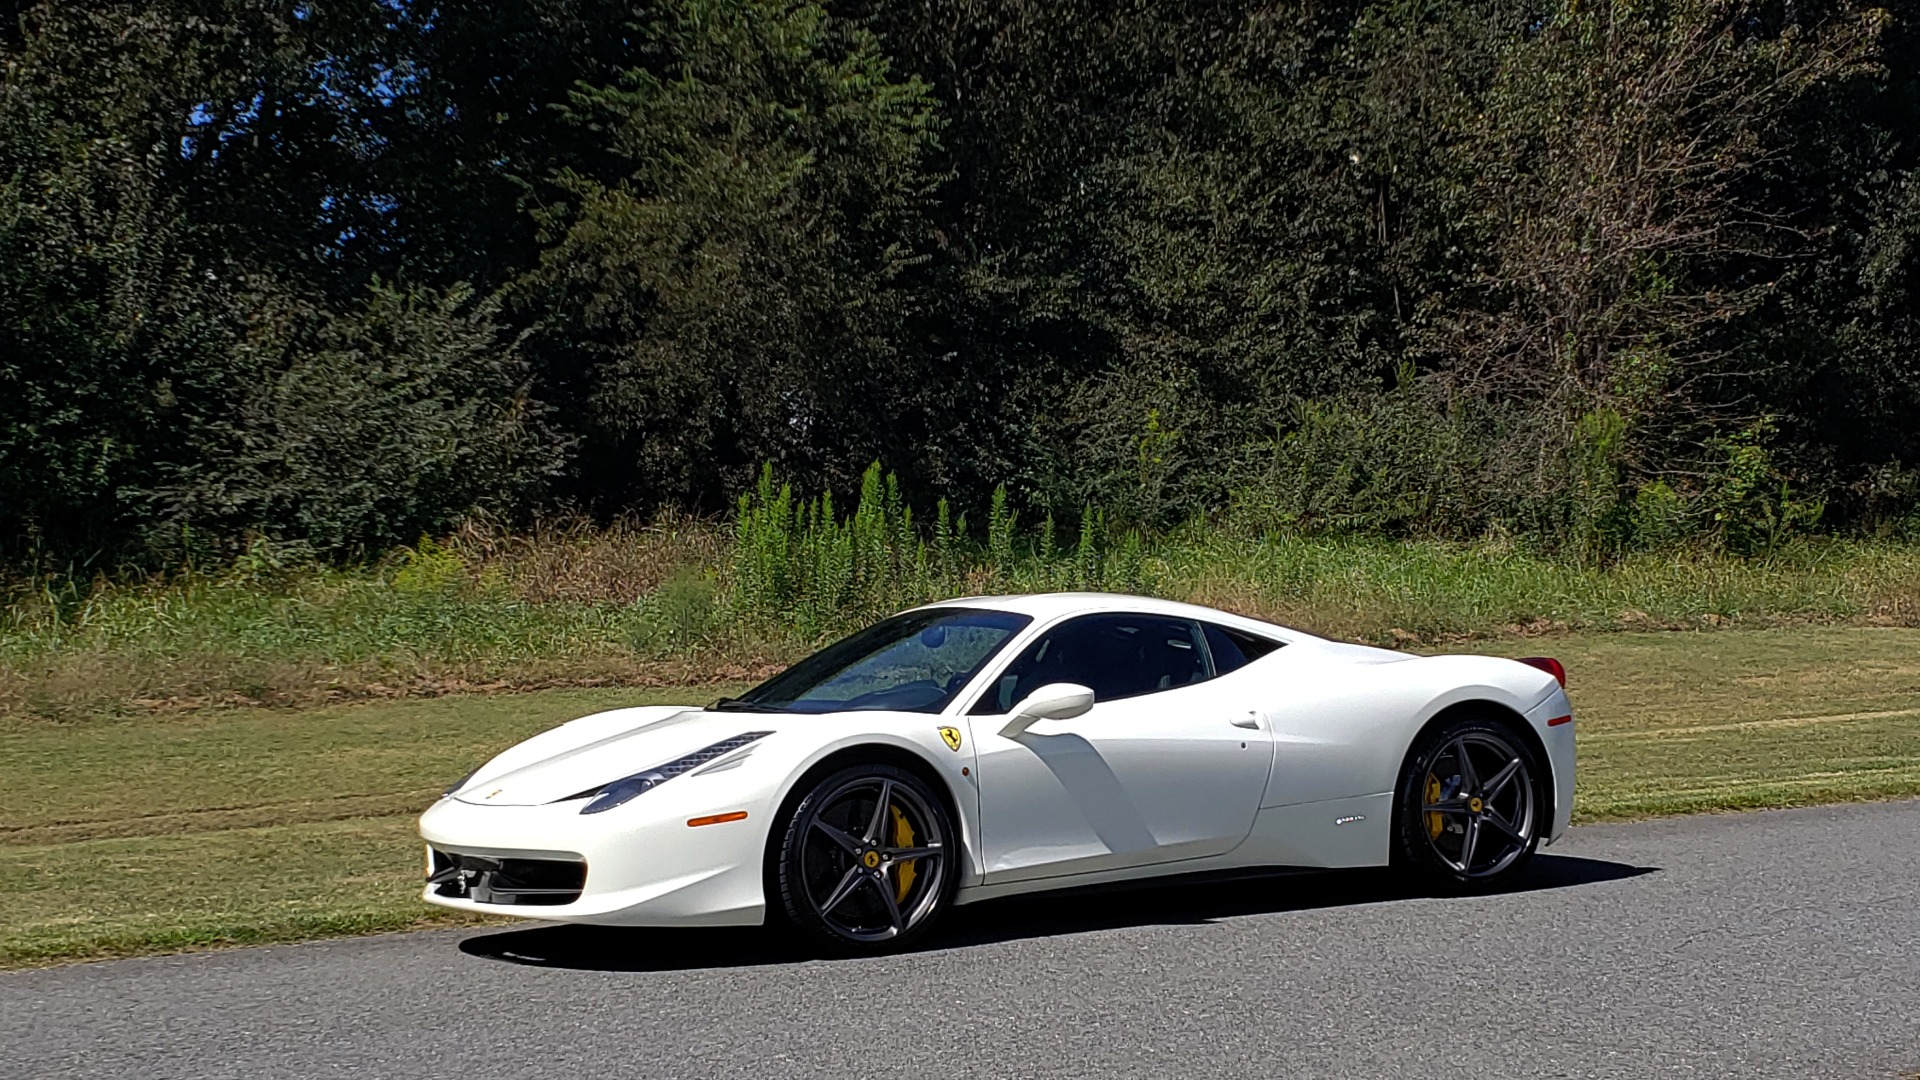 Used 2012 Ferrari 458 ITALIA COUPE / 4.5L V8 / 7-SPEED AUTO / LOW MILES SUPER CLEAN for sale Sold at Formula Imports in Charlotte NC 28227 9